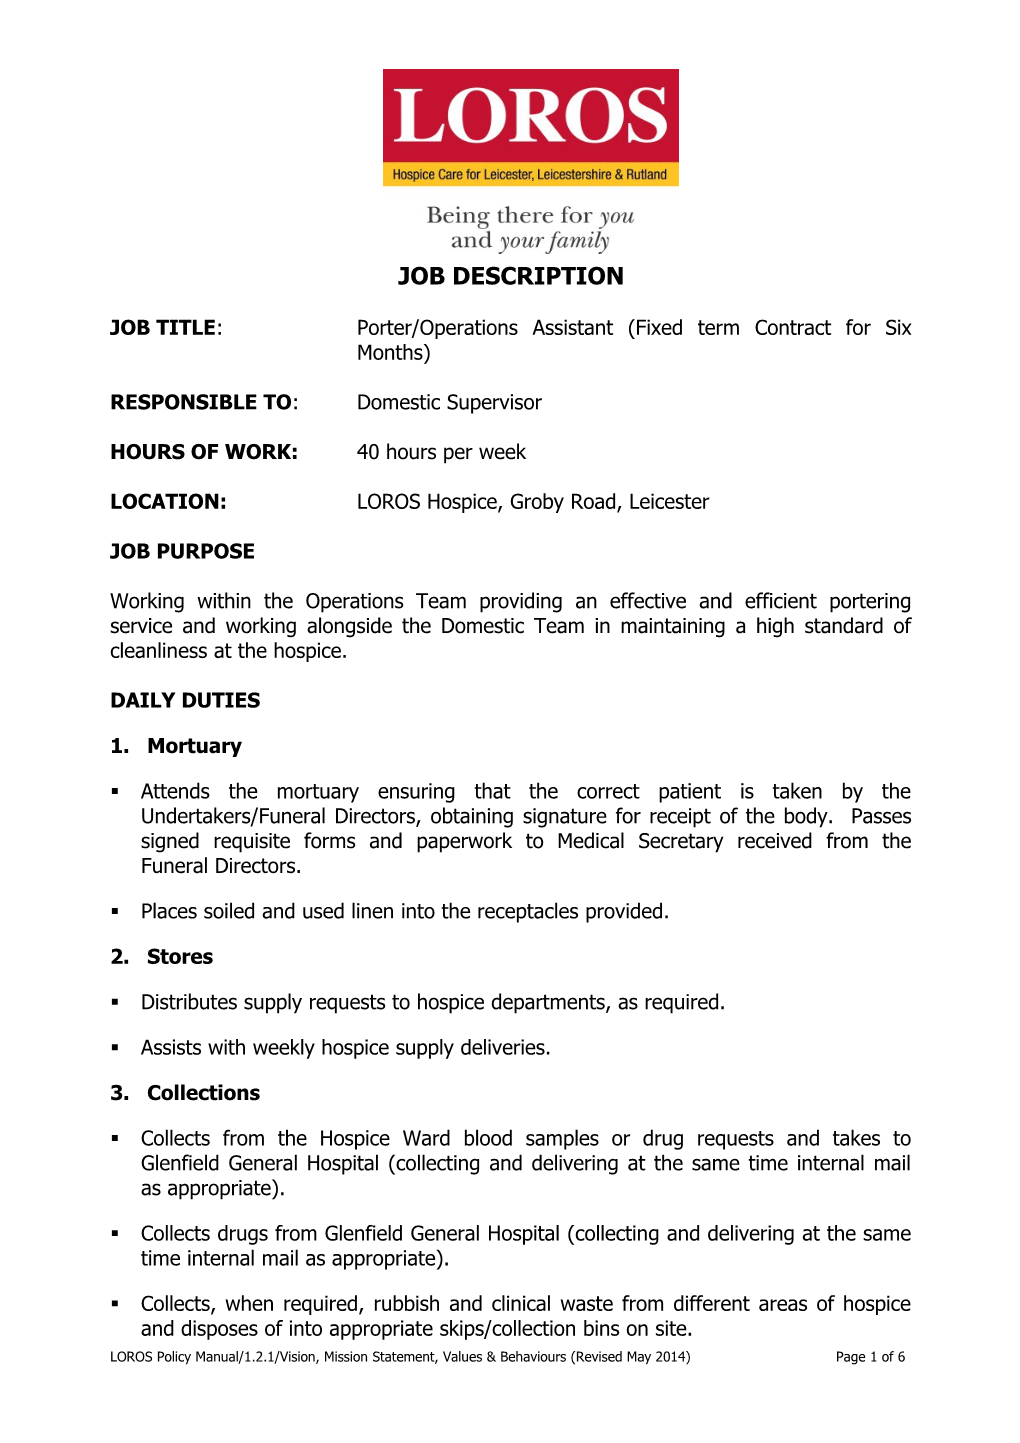 JOB TITLE:Porter/Operations Assistant (Fixed Term Contract for Six Months)